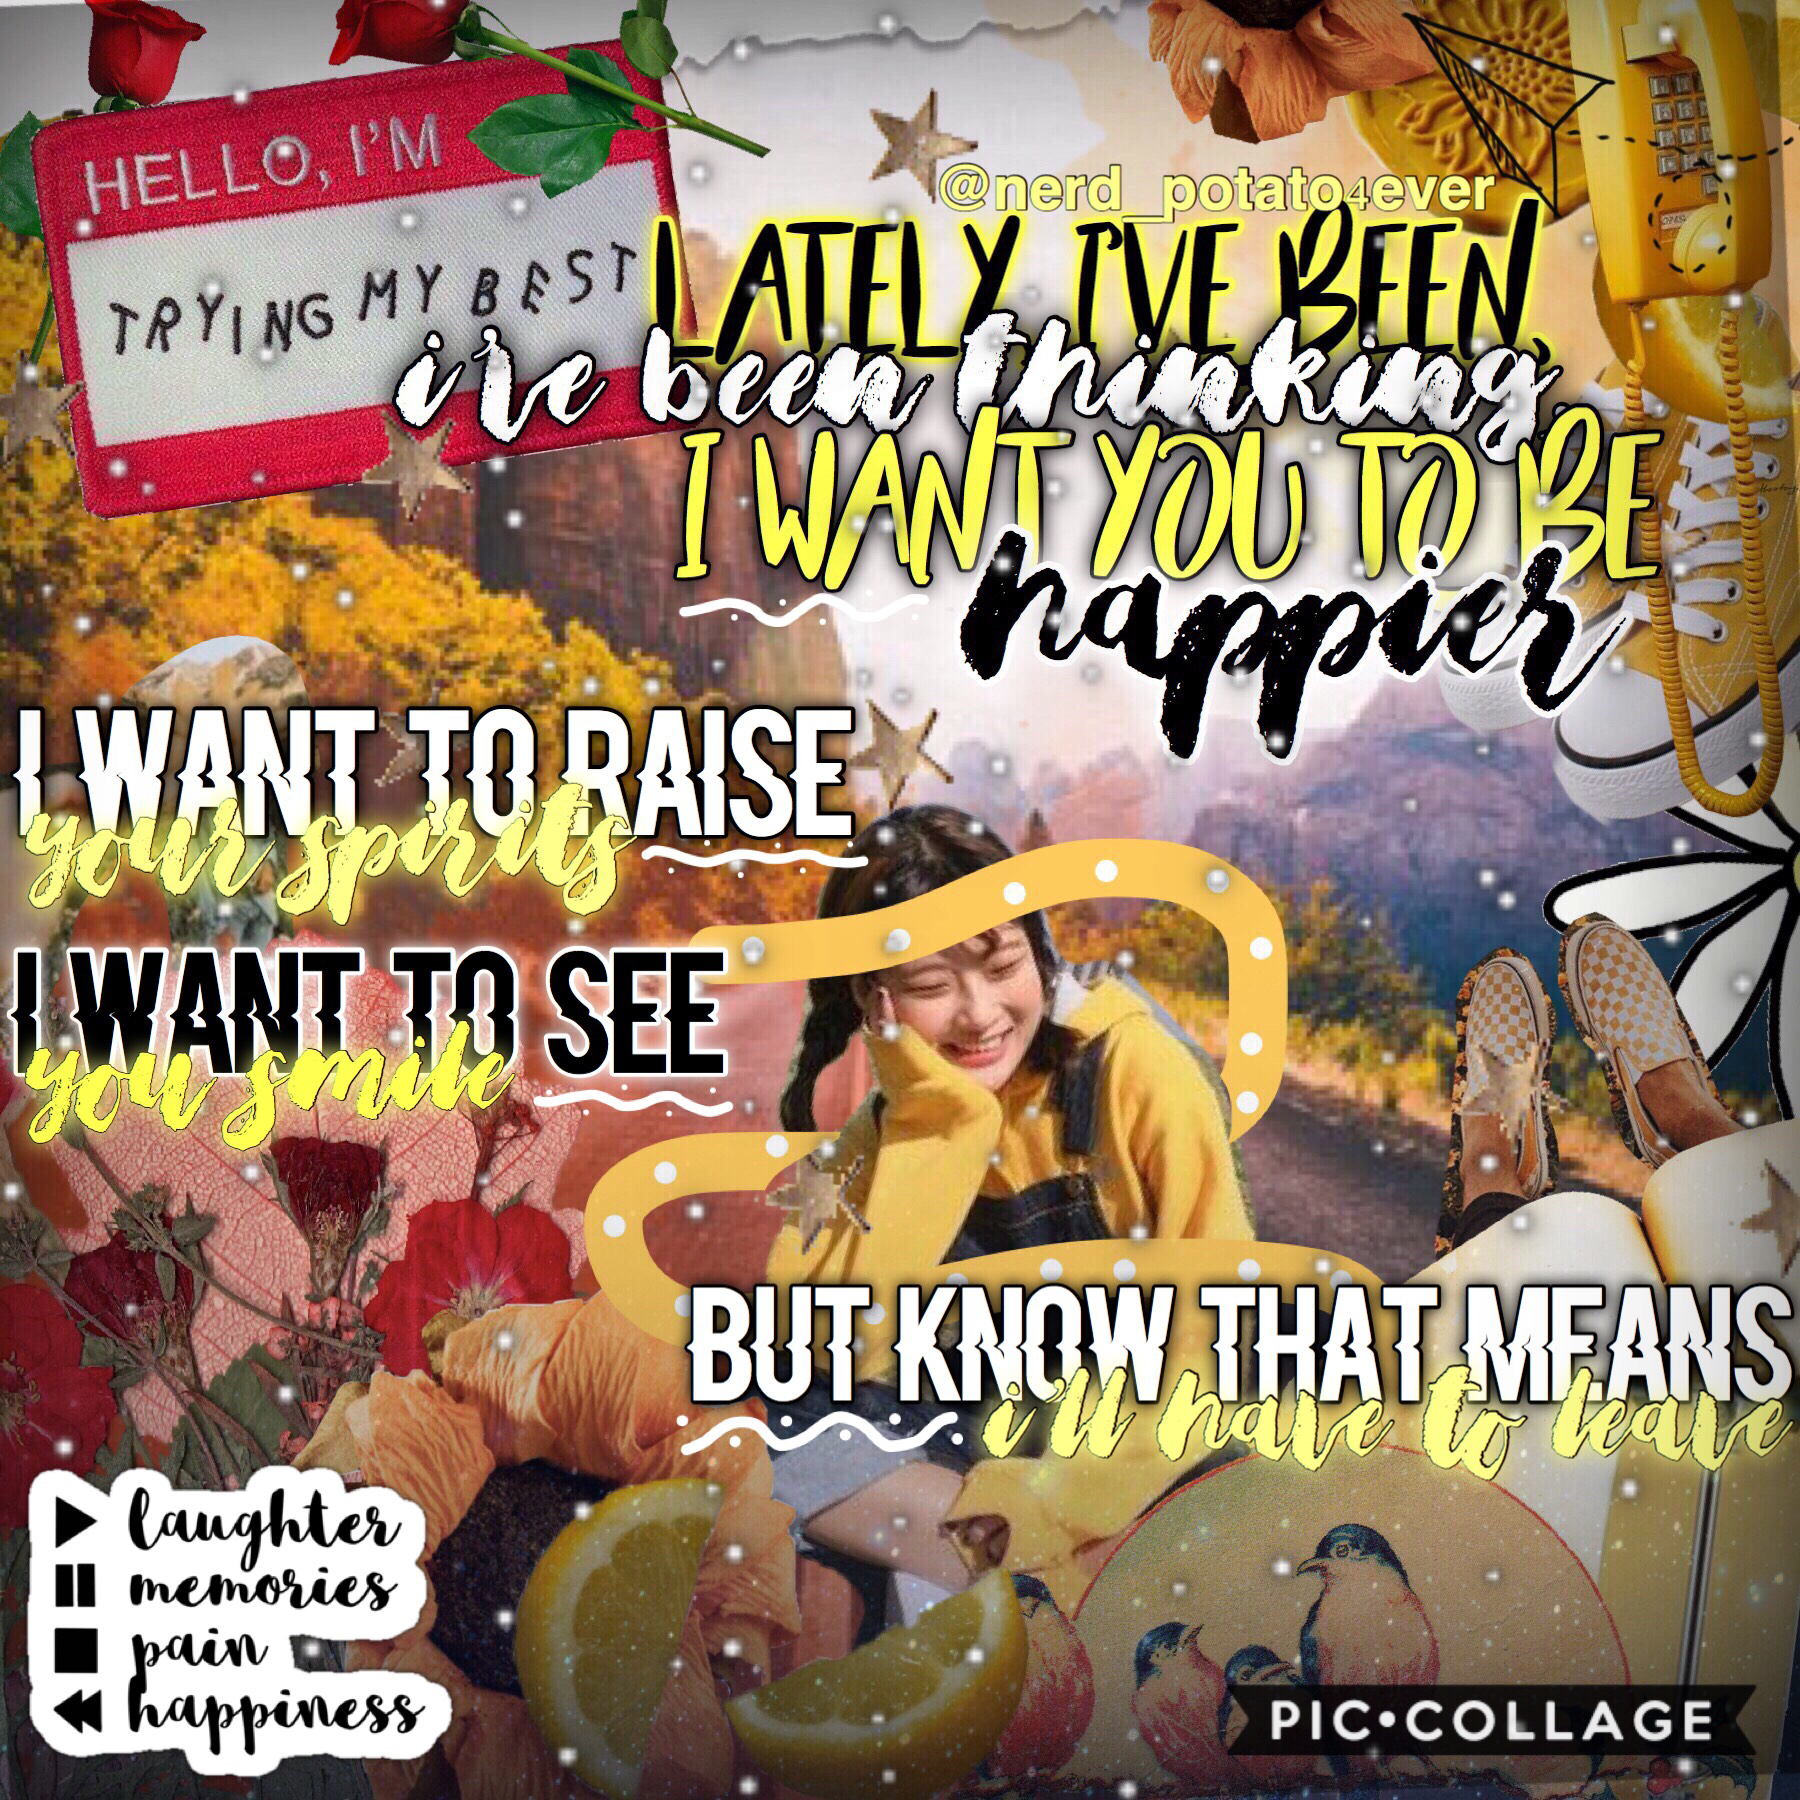 💛so this was inspired by mAnY artists,if you think you’re one of them,bc you probably are,wave in the comments👋🏻💛this song personally speaks to me,bc I can relate so much,even if I haven’t been in a relationship💛